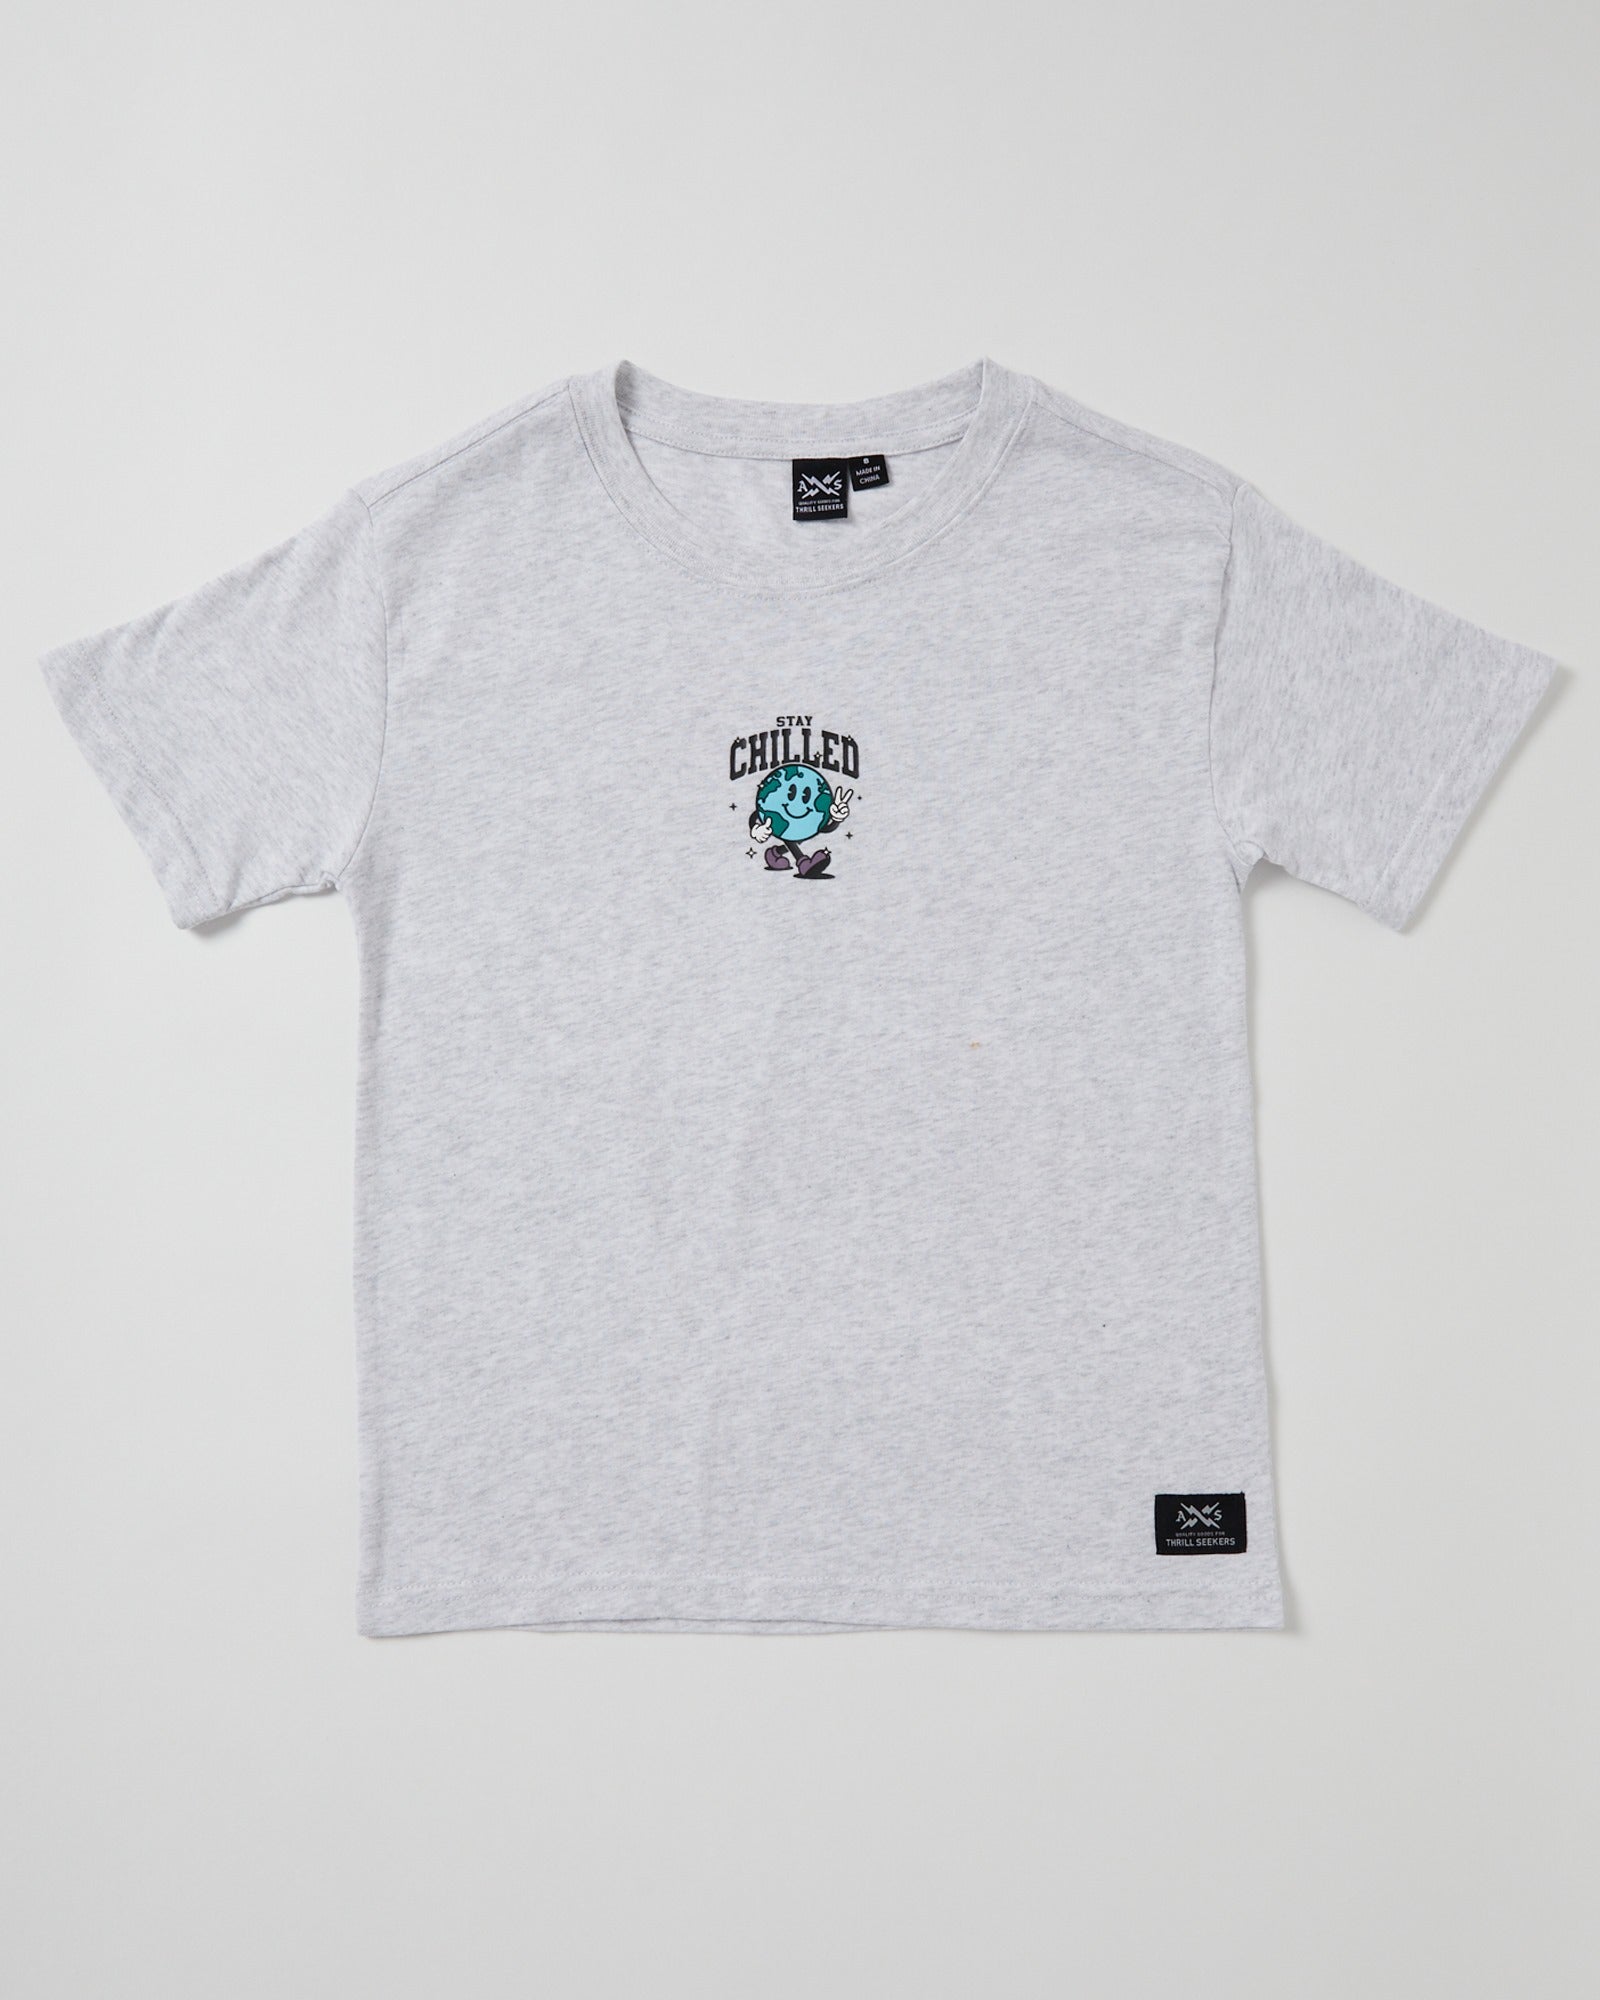 This Teen Boy Chill Short Sleeve Tee by Alphabet Soup is made of 100% grey marle cotton jersey and features a ribbed crew neckline, straight hemline, and short sleeves. The centred print on the chest adds a stylish touch.